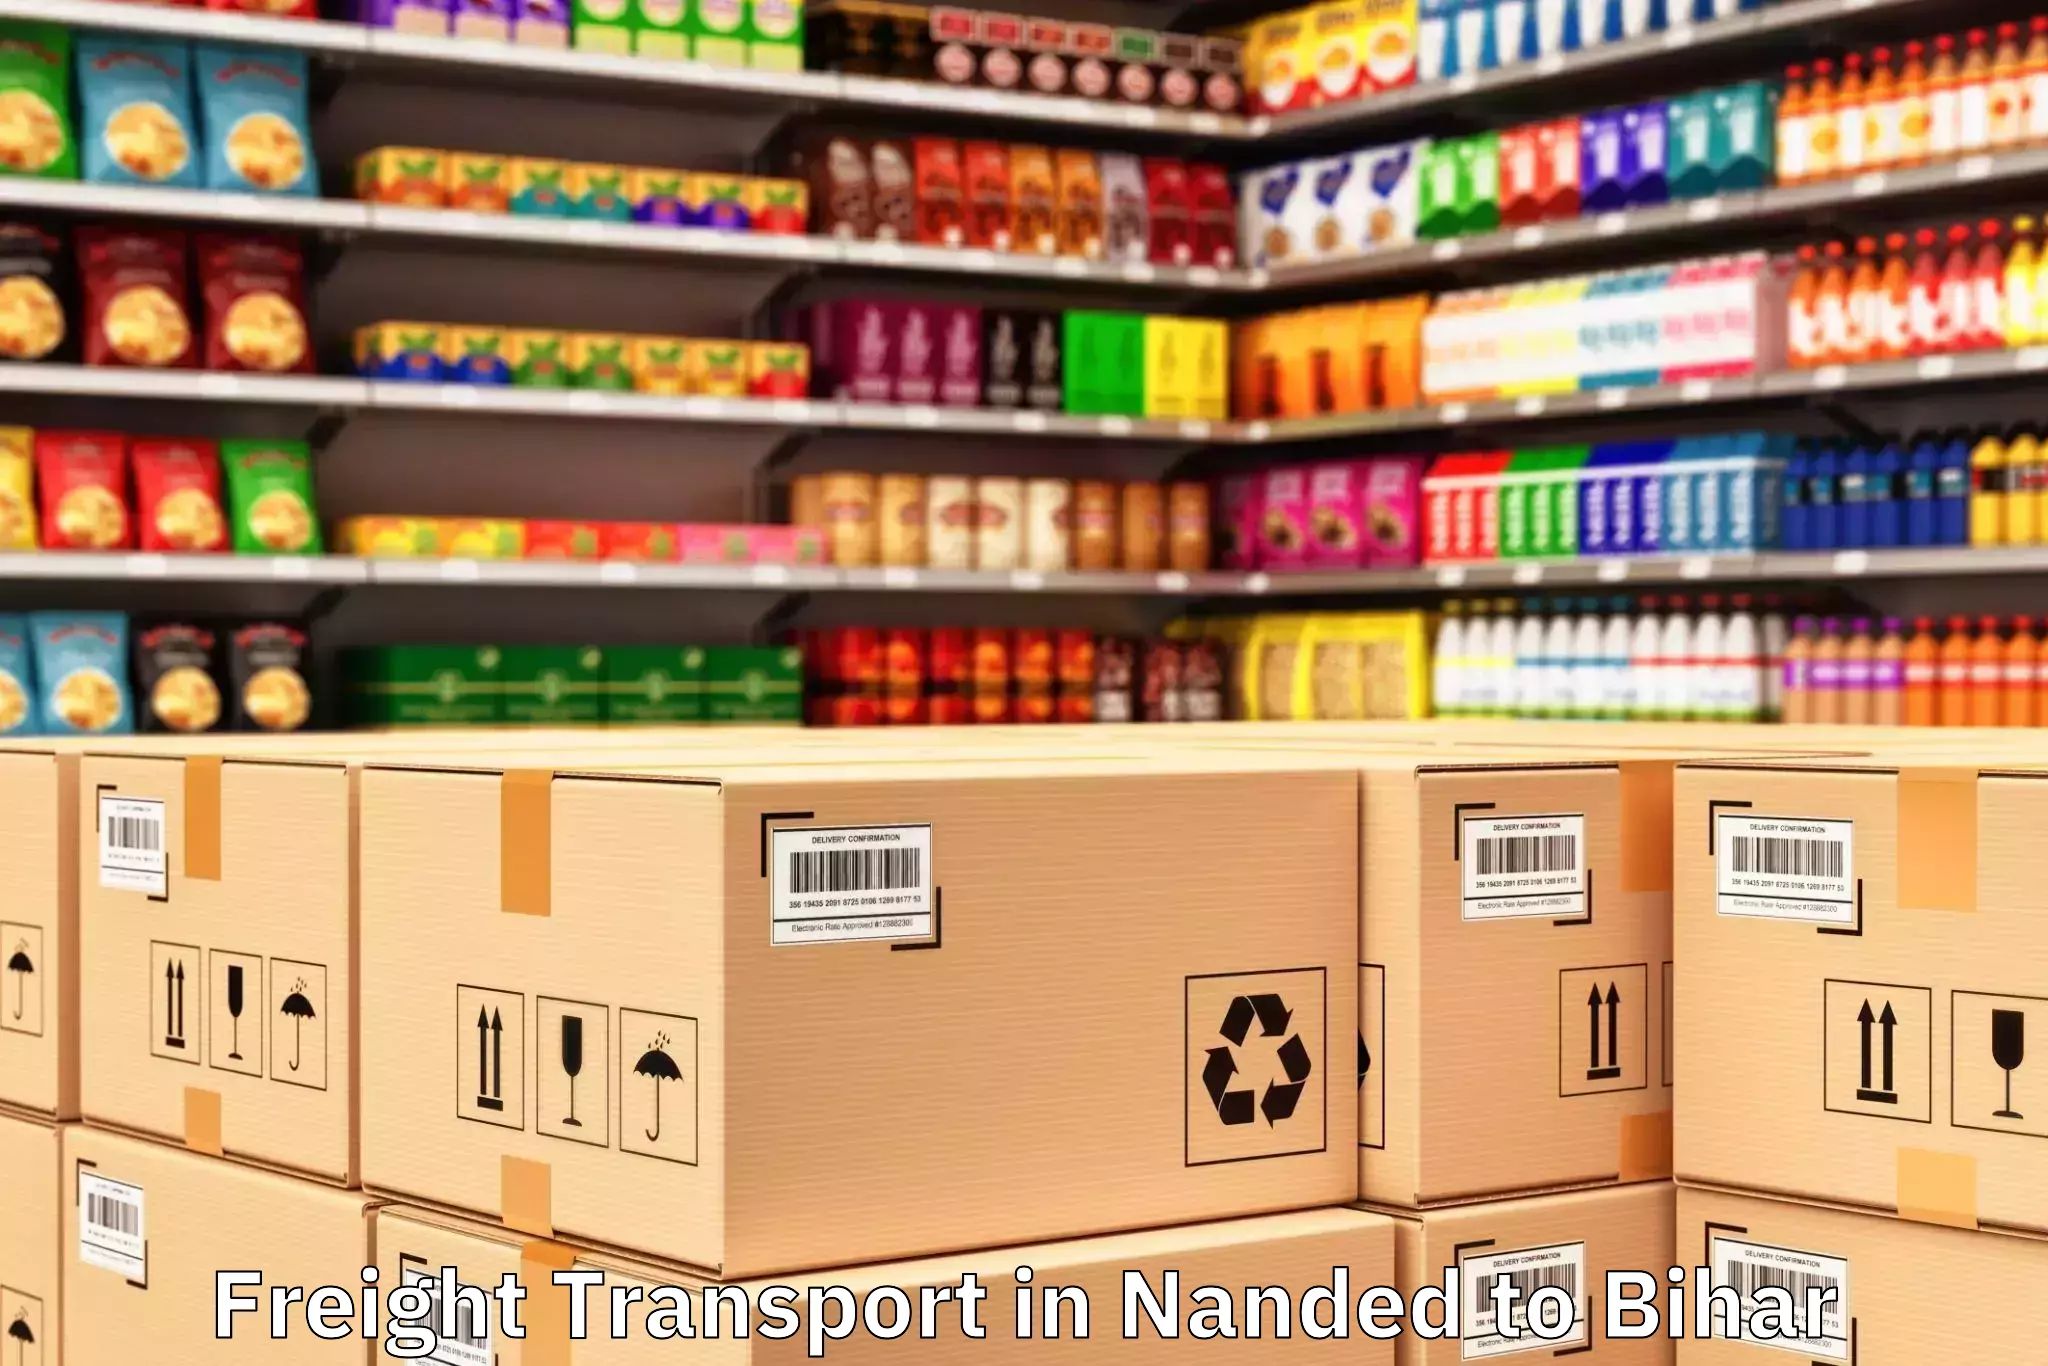 Leading Nanded to Patna One Mall Freight Transport Provider